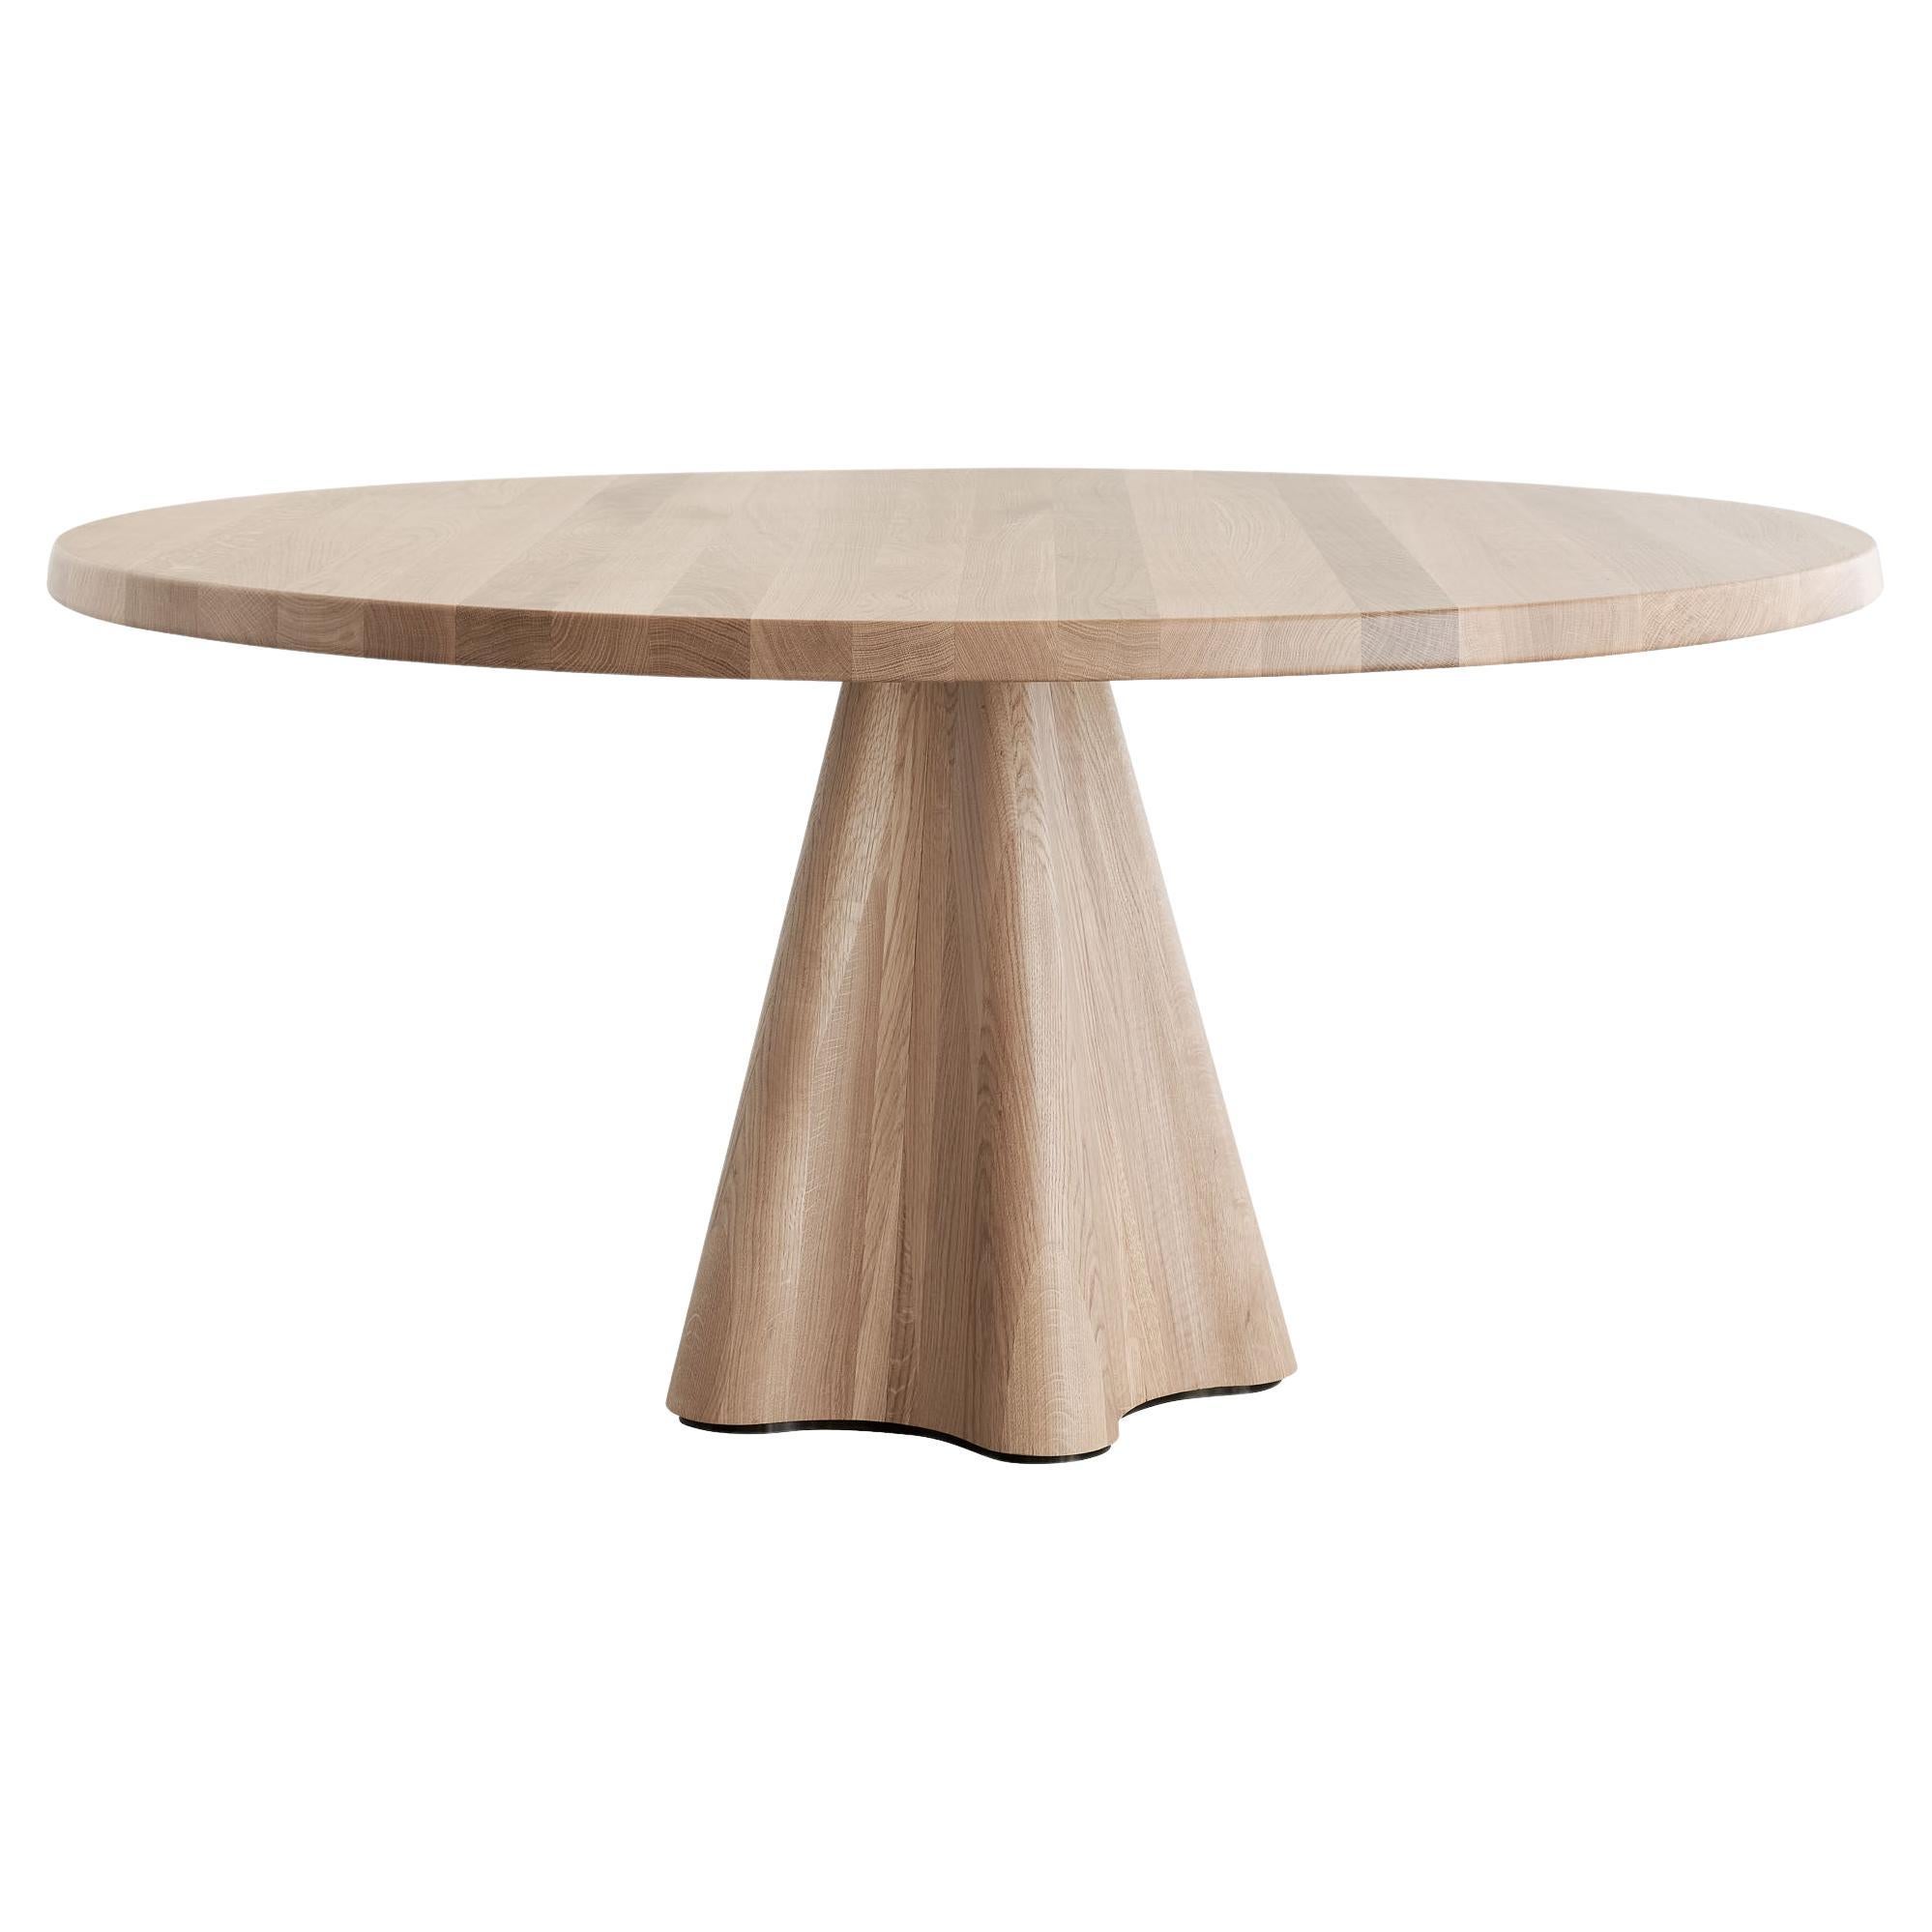 Schumacher Editions Stella 54" Dining Table in White Oak For Sale